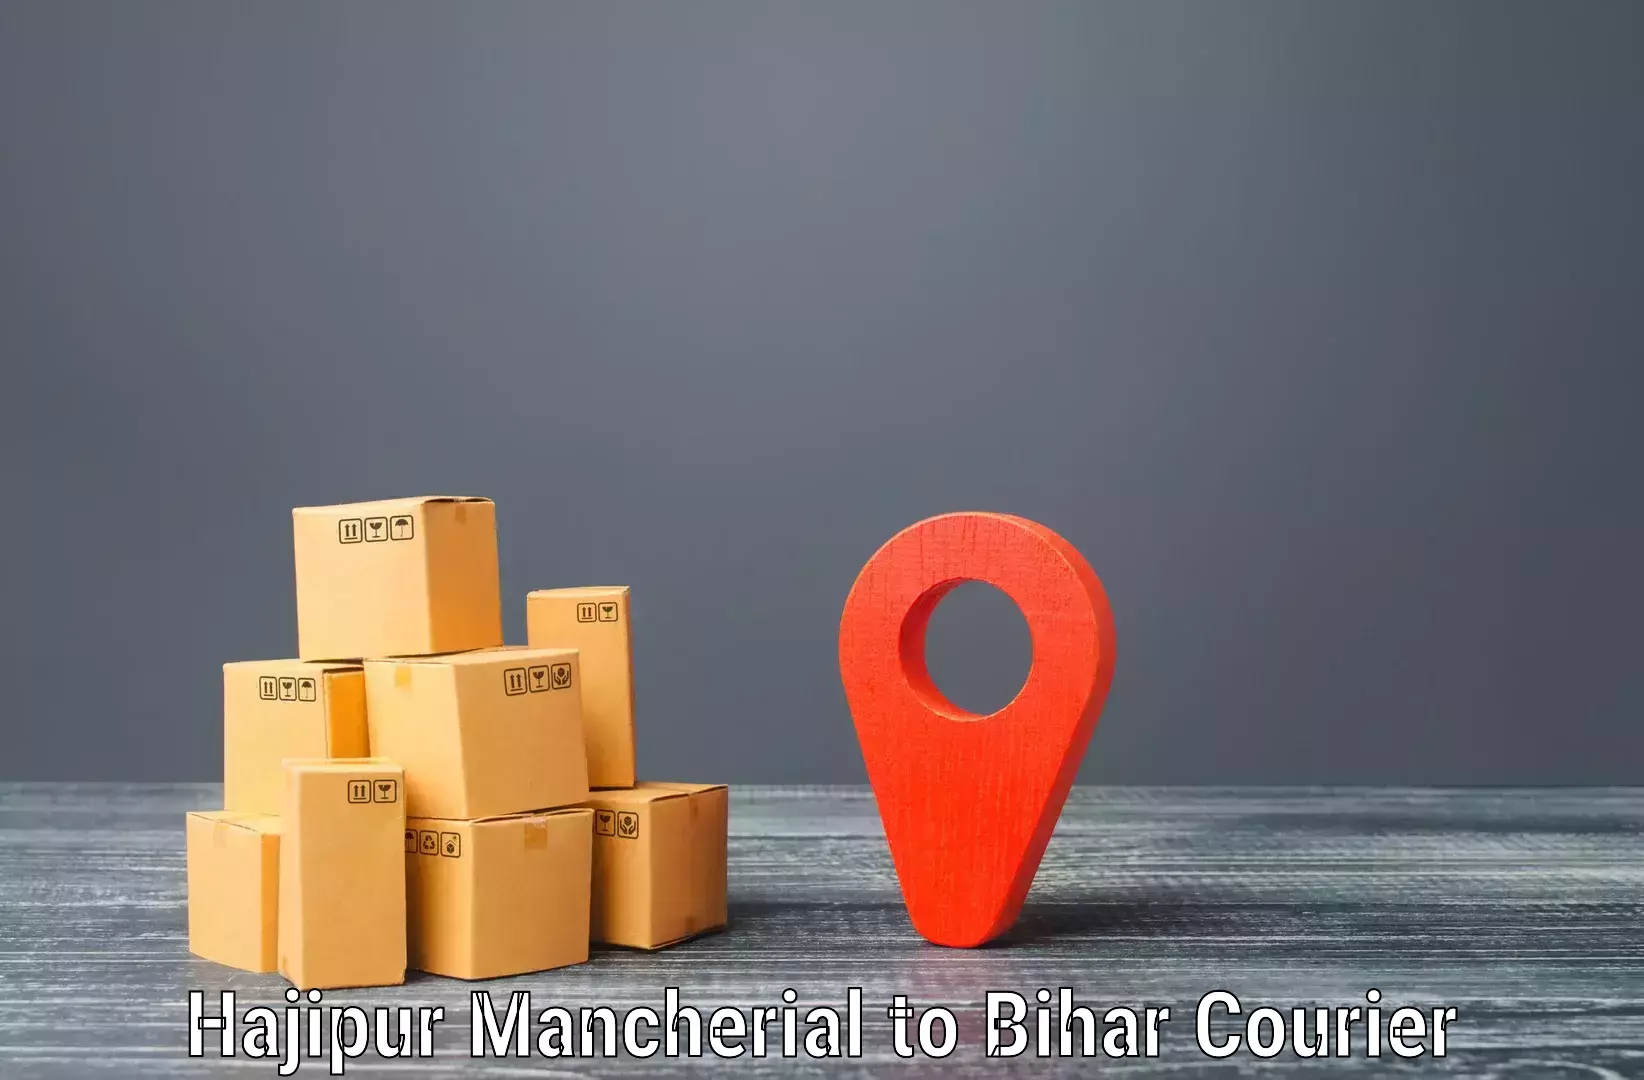 Holiday shipping services Hajipur Mancherial to Chainpur